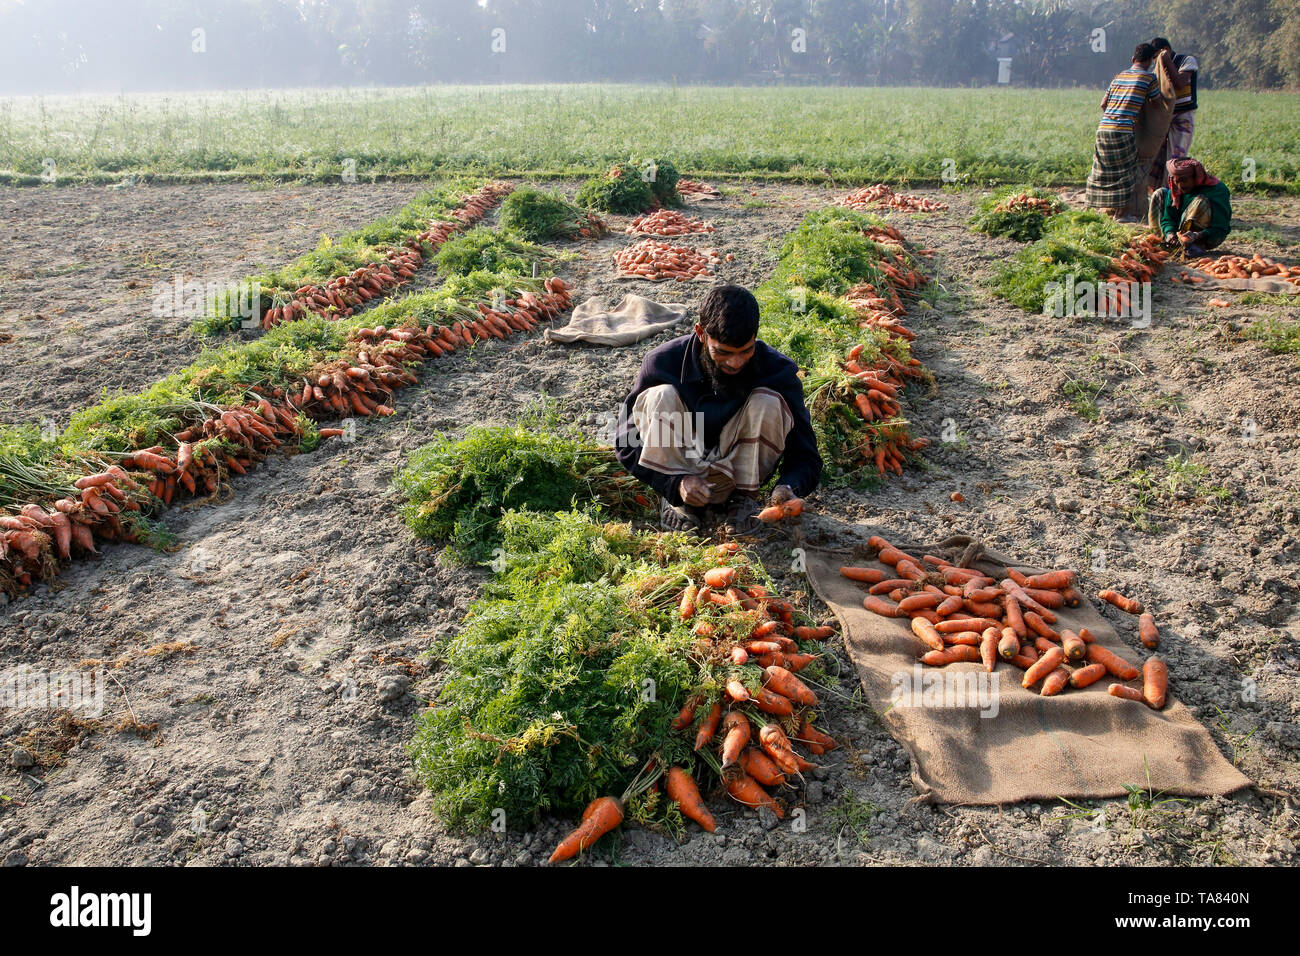 Farmers extract carrots from the fields at Singair in Manikganj, Bangladesh Stock Photo